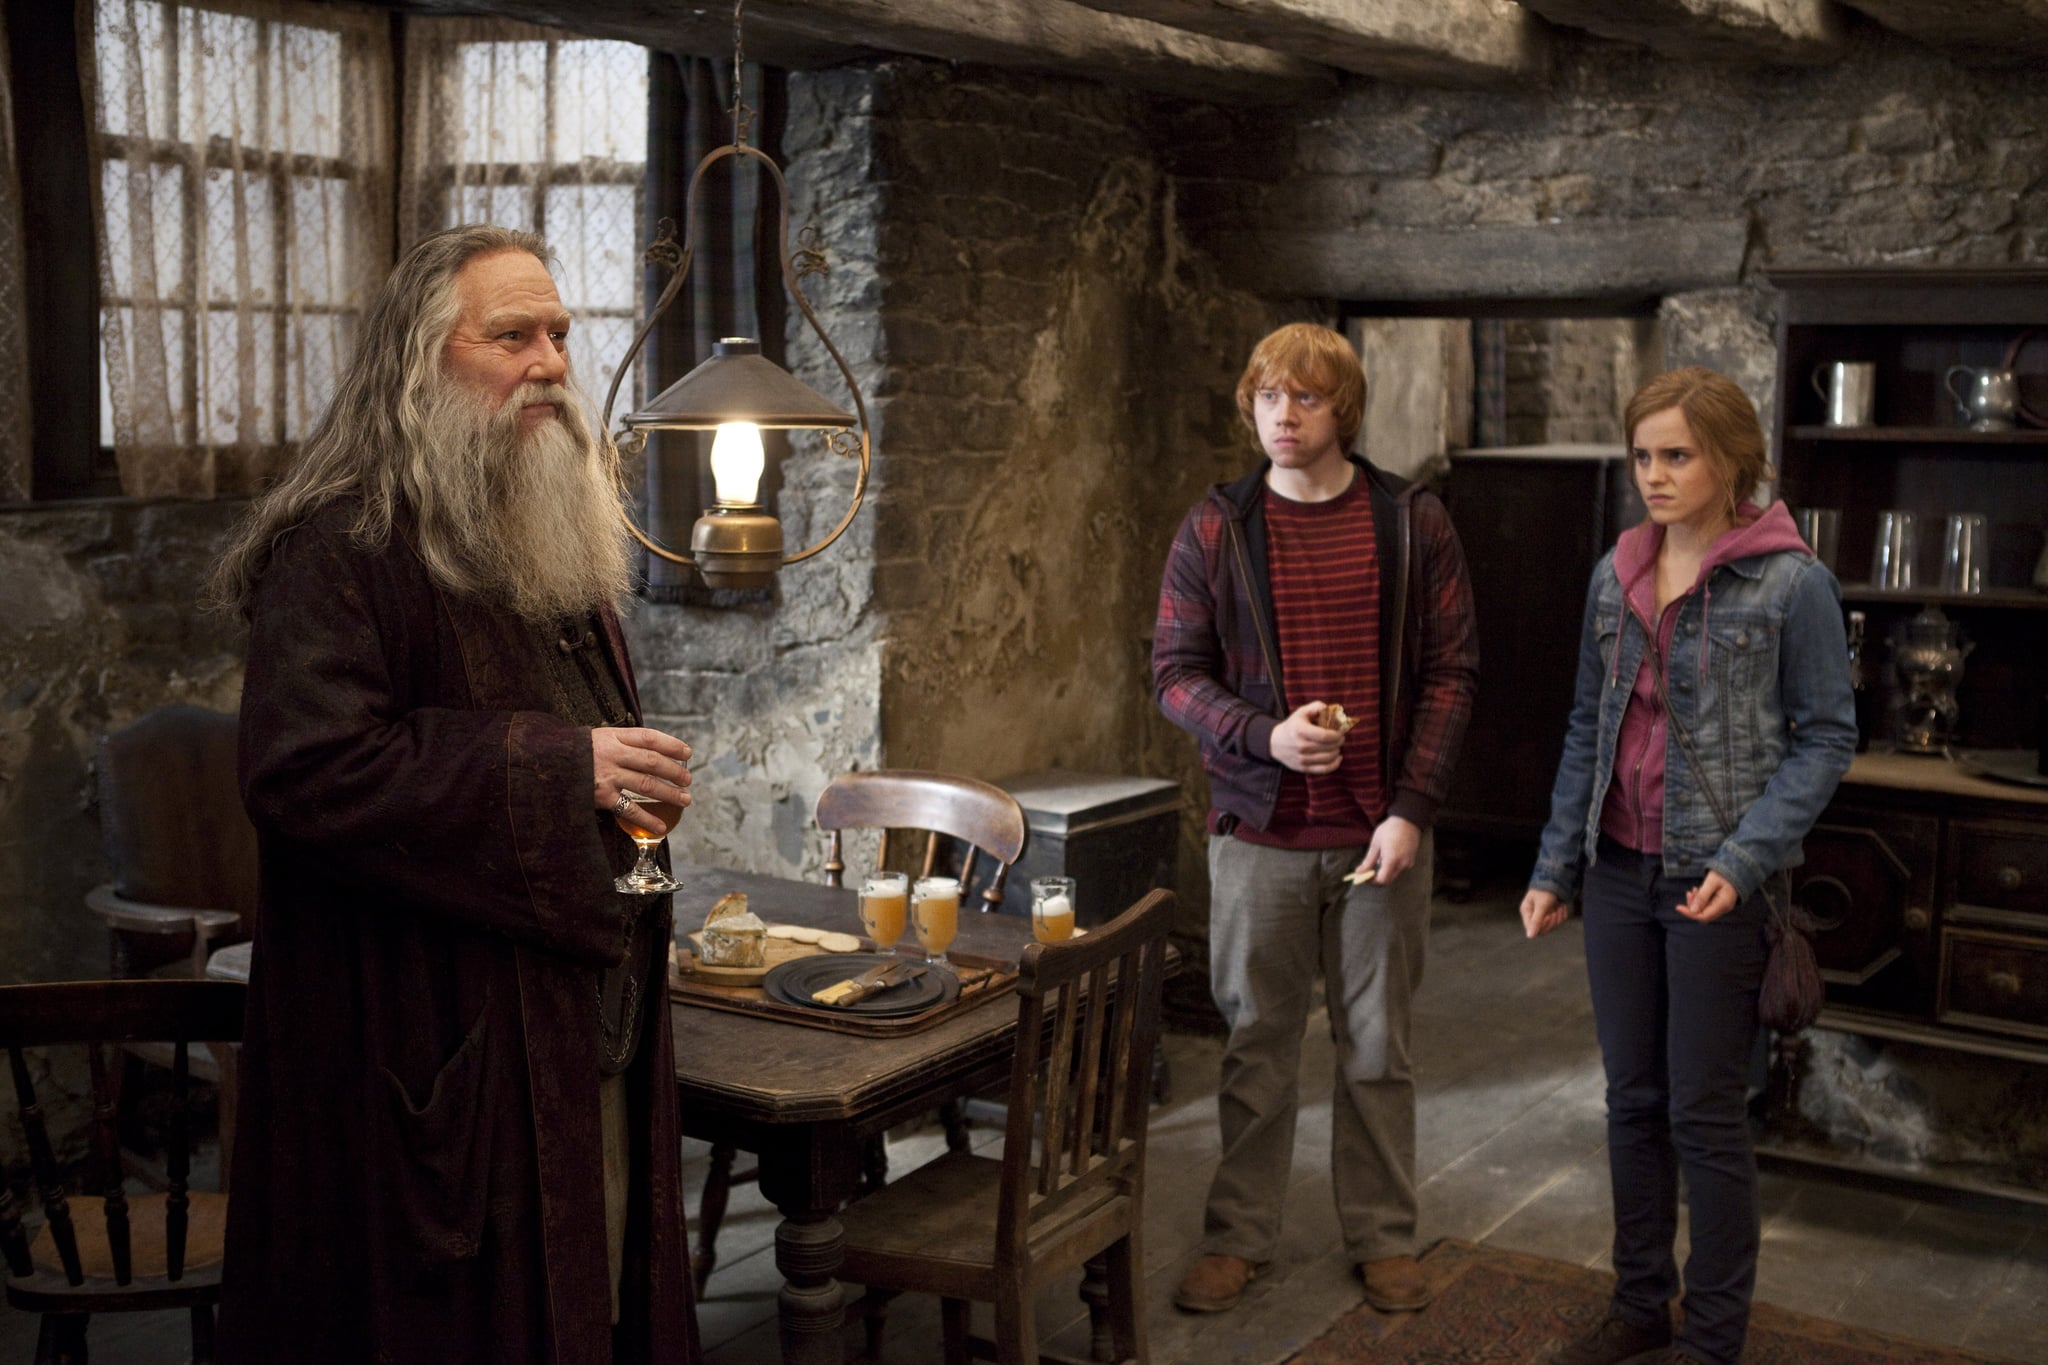 HARRY POTTER AND THE DEATHLY HALLOWS: PART 2, from left: Ciaran Hinds, Rupert Grint, Emma Watson, 2011. ph: Jaap Buitendijk/2011 Warner Bros. Ent. Harry Potter publishing rights J.K.R. Harry Potter characters, names and related indicia are trademarks of and Warner Bros. Ent. All rights reserved./Courtesy Everett Collection